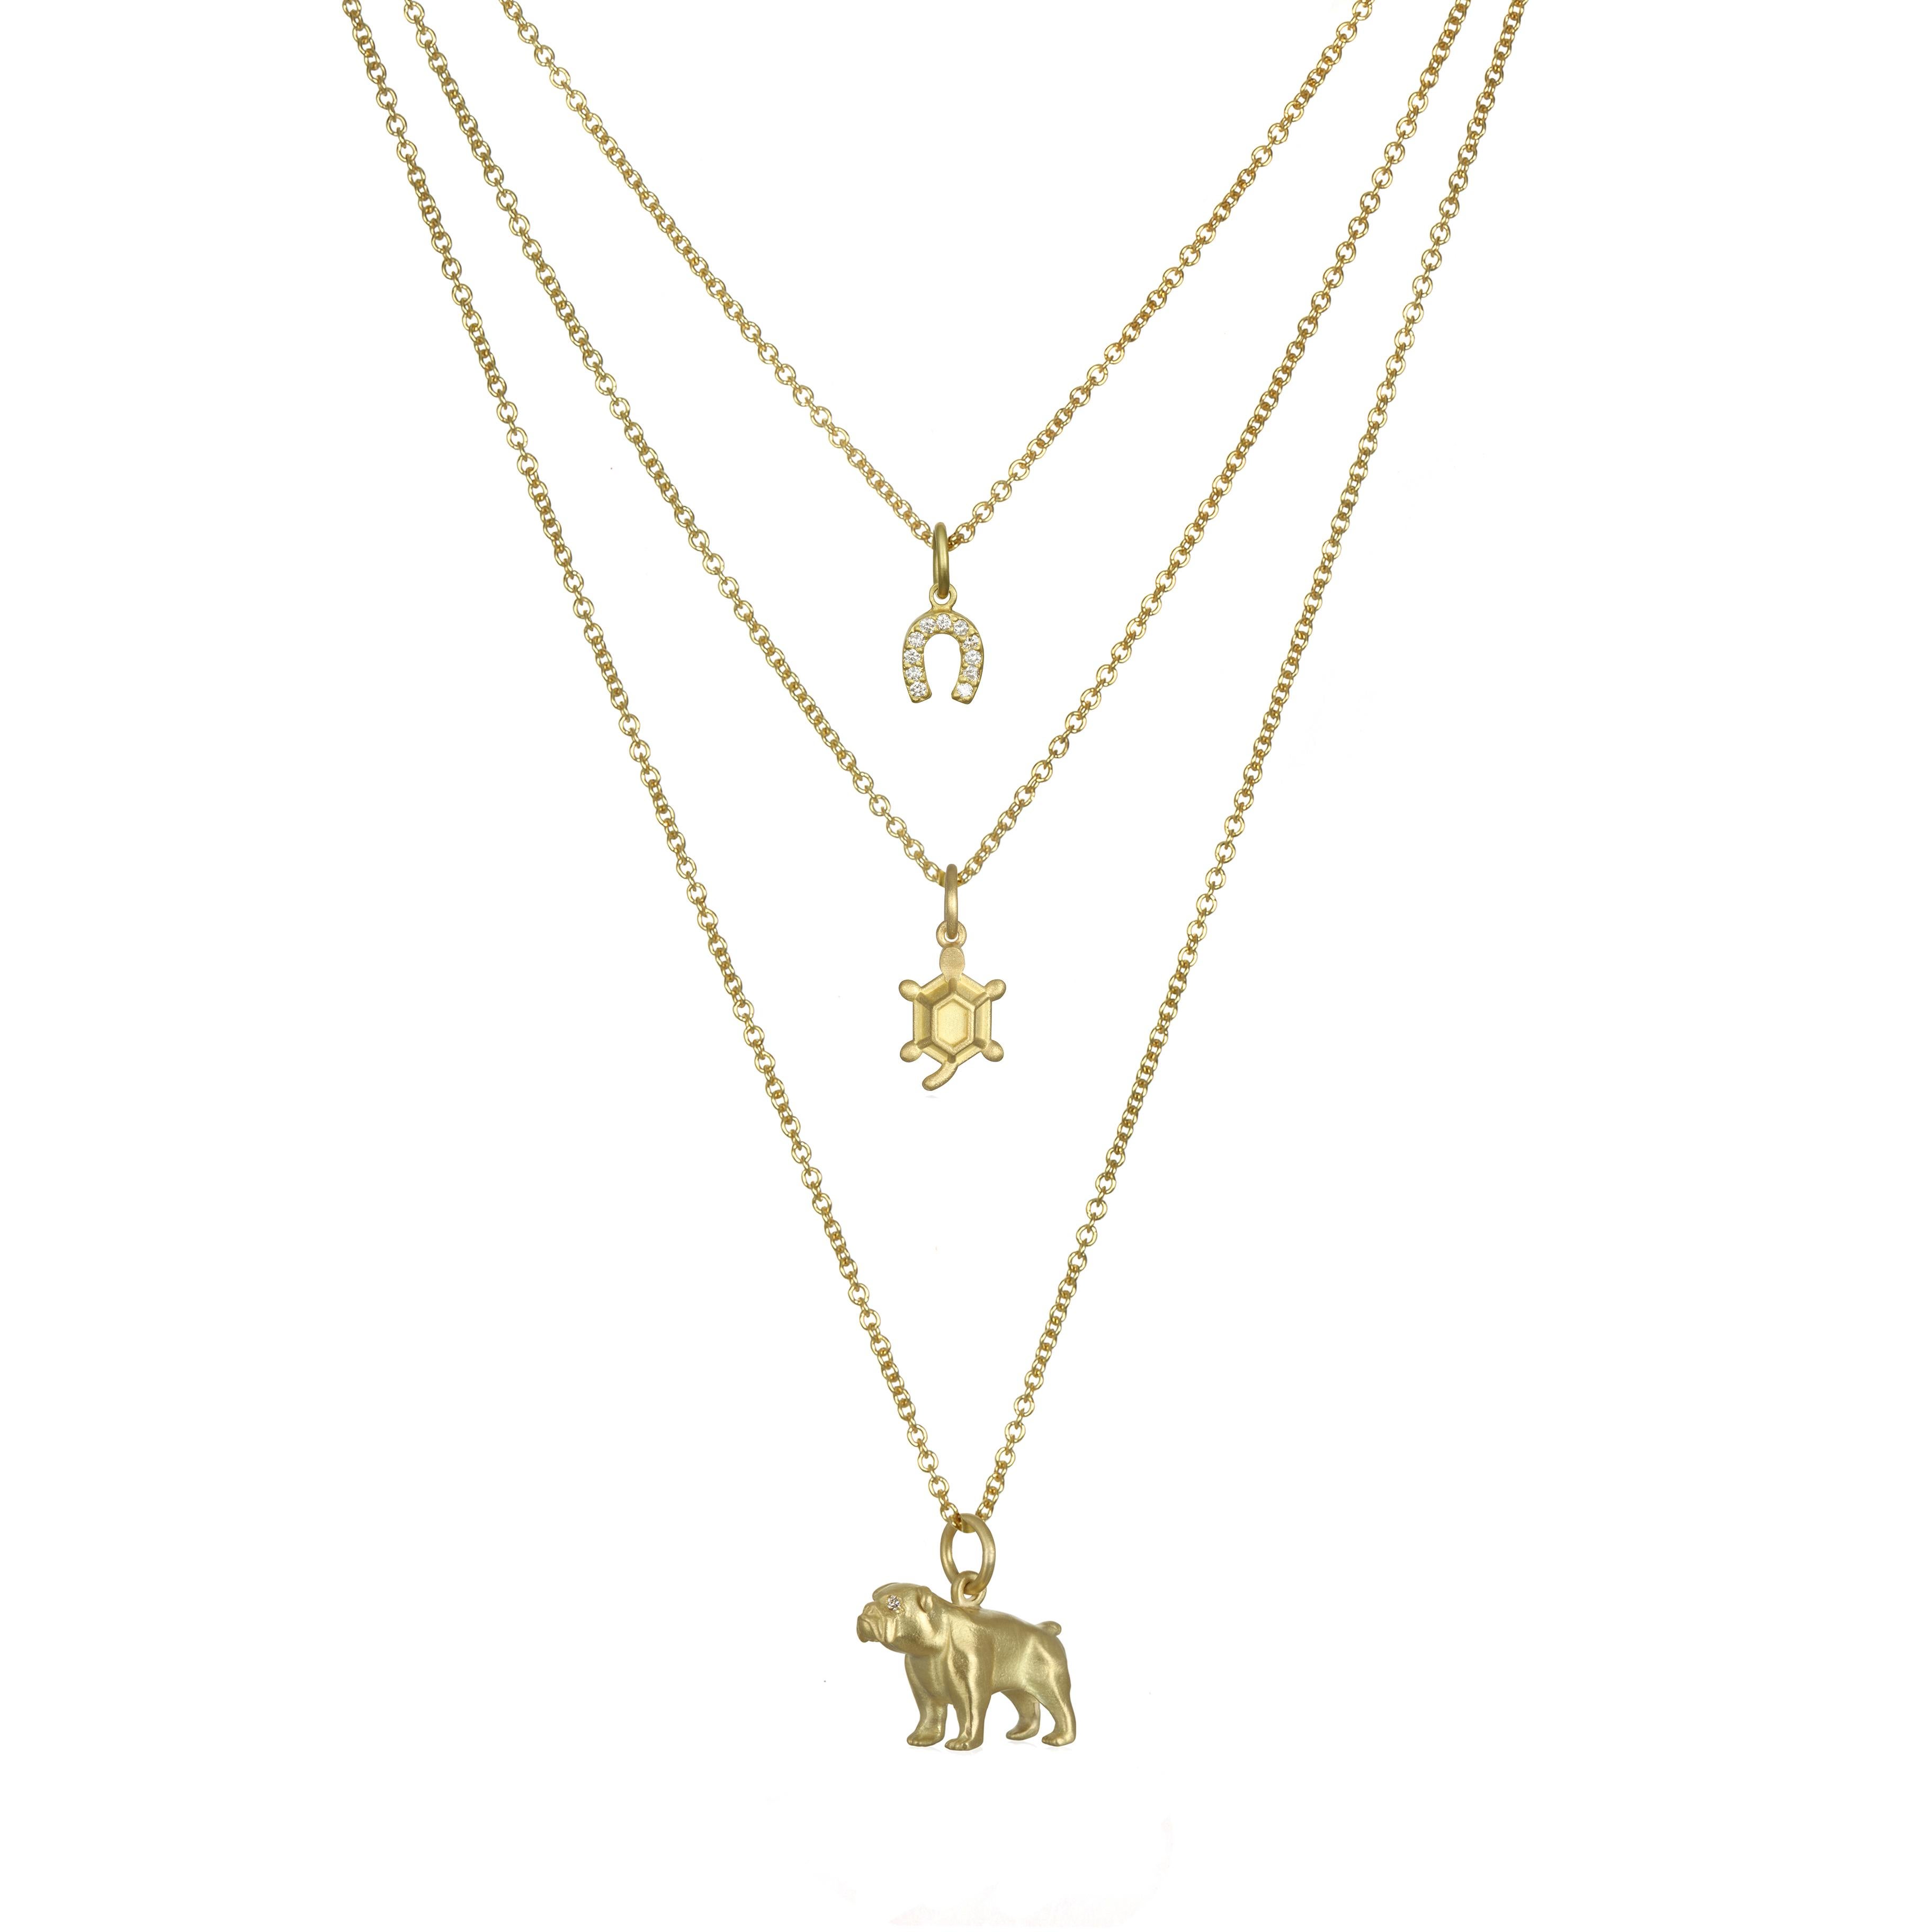 For the Bulldog Lover - guidance, protection, loyalty, fidelity, watchfulness, and love. 
Cable chain is 16-18